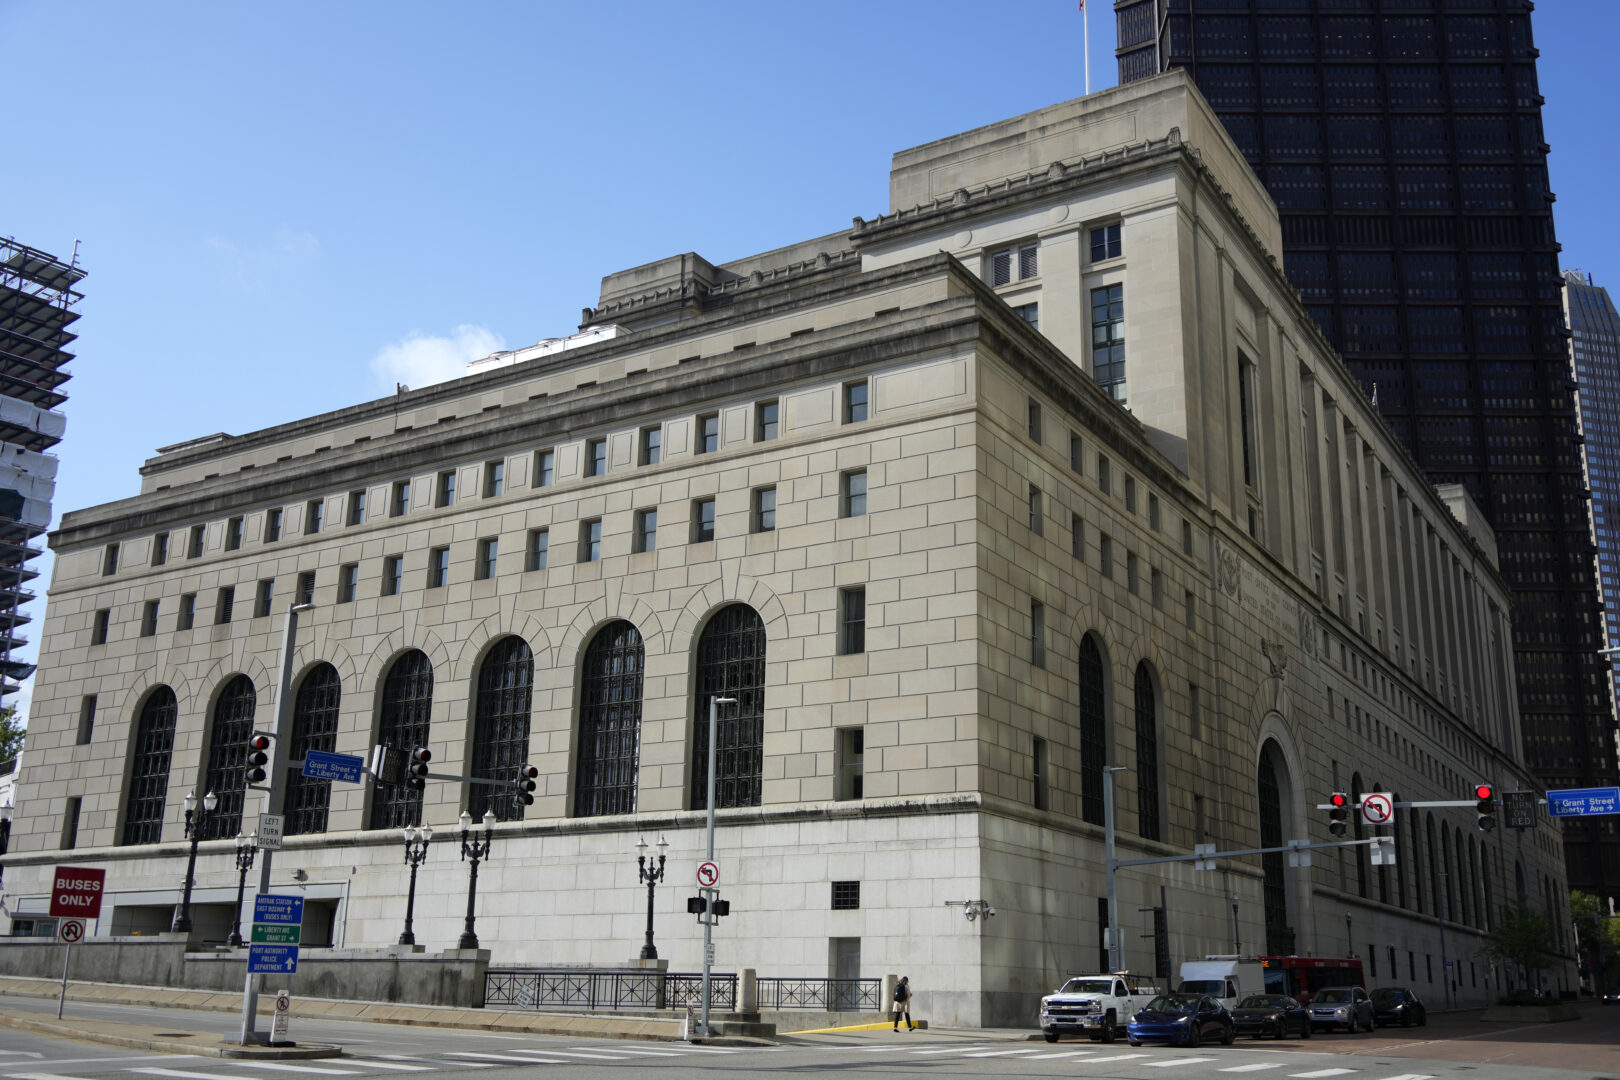 This is the Federal Courthouse in downtown Pittsburgh on Monday April 24, 2023. The long-delayed capital murder trial of Robert Bowers accused in the 2018 Pittsburgh synagogue massacre will begin with jury selection beginning April 24, 2023, at the Federal Courthouse in Pittsburgh, a federal judge has ruled. Bowers, a Baldwin resident who has pleaded not guilty, could be sentenced to death if convicted of the shootings. He faces more than 60 federal charges stemming from the Oct. 27, 2018, attack at the Tree of Life synagogue in Pittsburgh that killed 11 worshippers in the deadliest attack on Jewish people in U.S. history. (AP Photo/Gene J. Puskar)